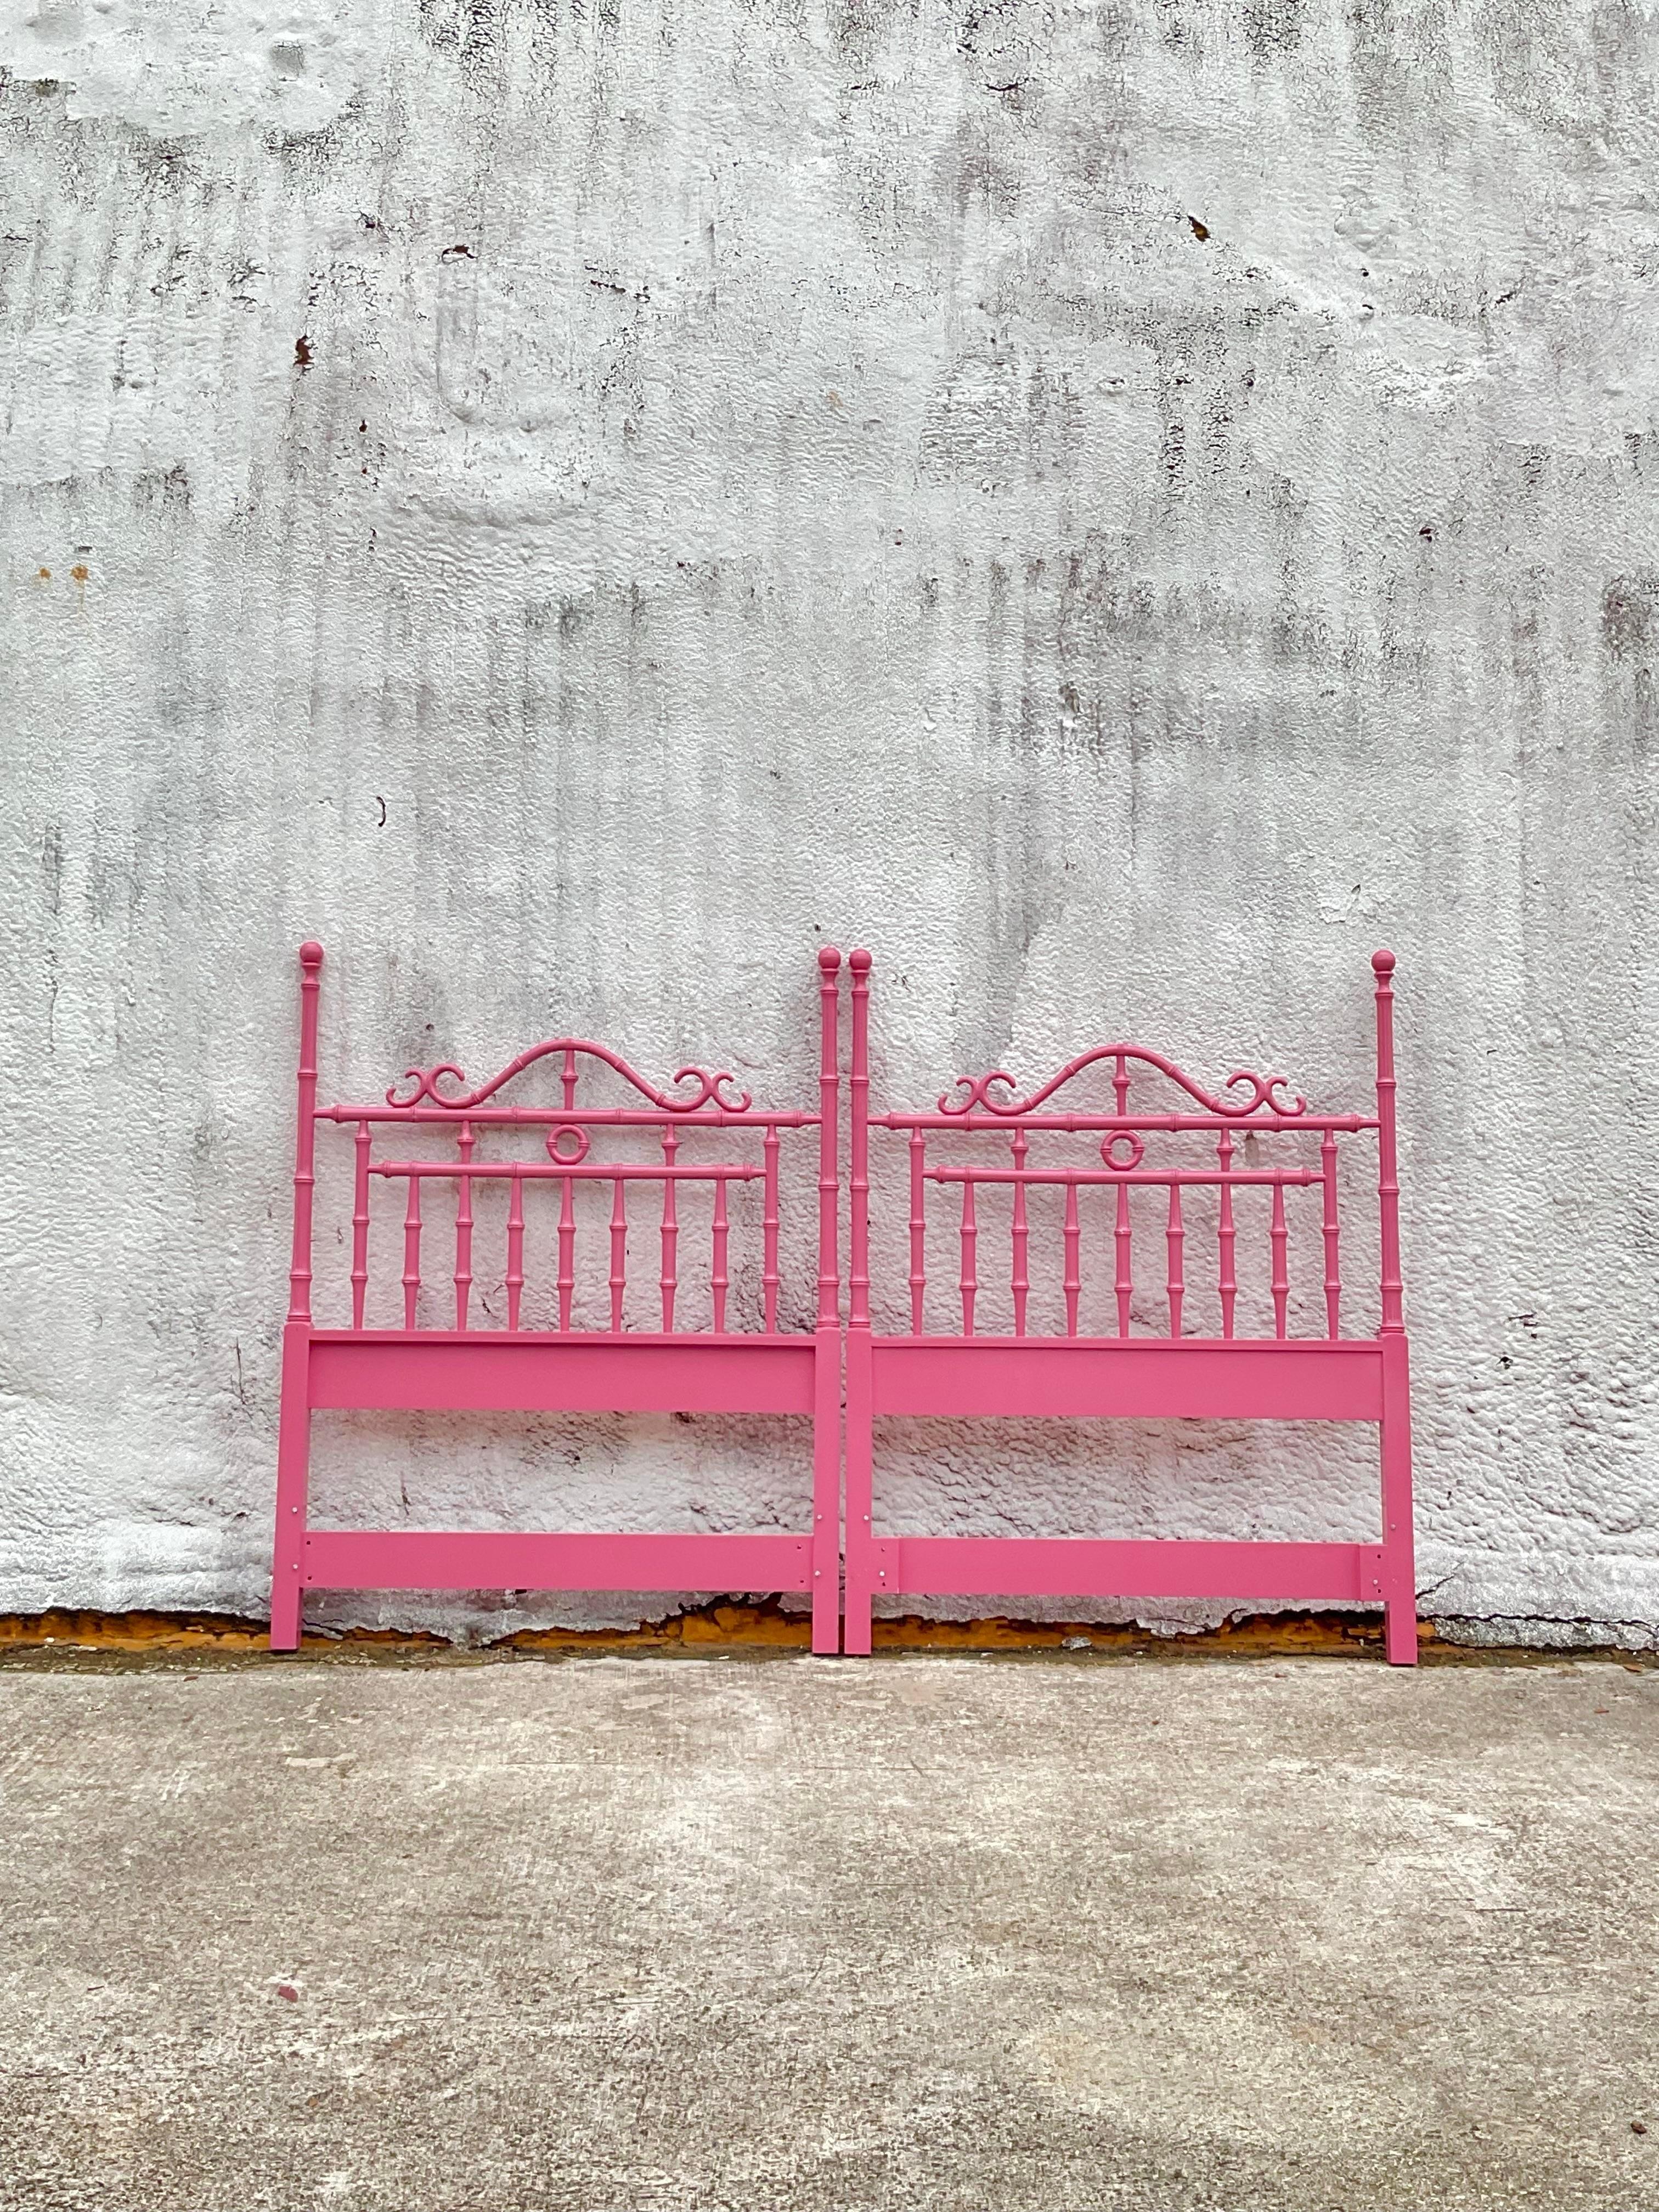 A not only gorgeous but also unique pair of vintage headboards made of wood. The wood is made to look like bamboo in an intricate design and painted in a bright shade of hot pink. Add a fun pop of color to any guest suite. Acquired at a Palm Beach